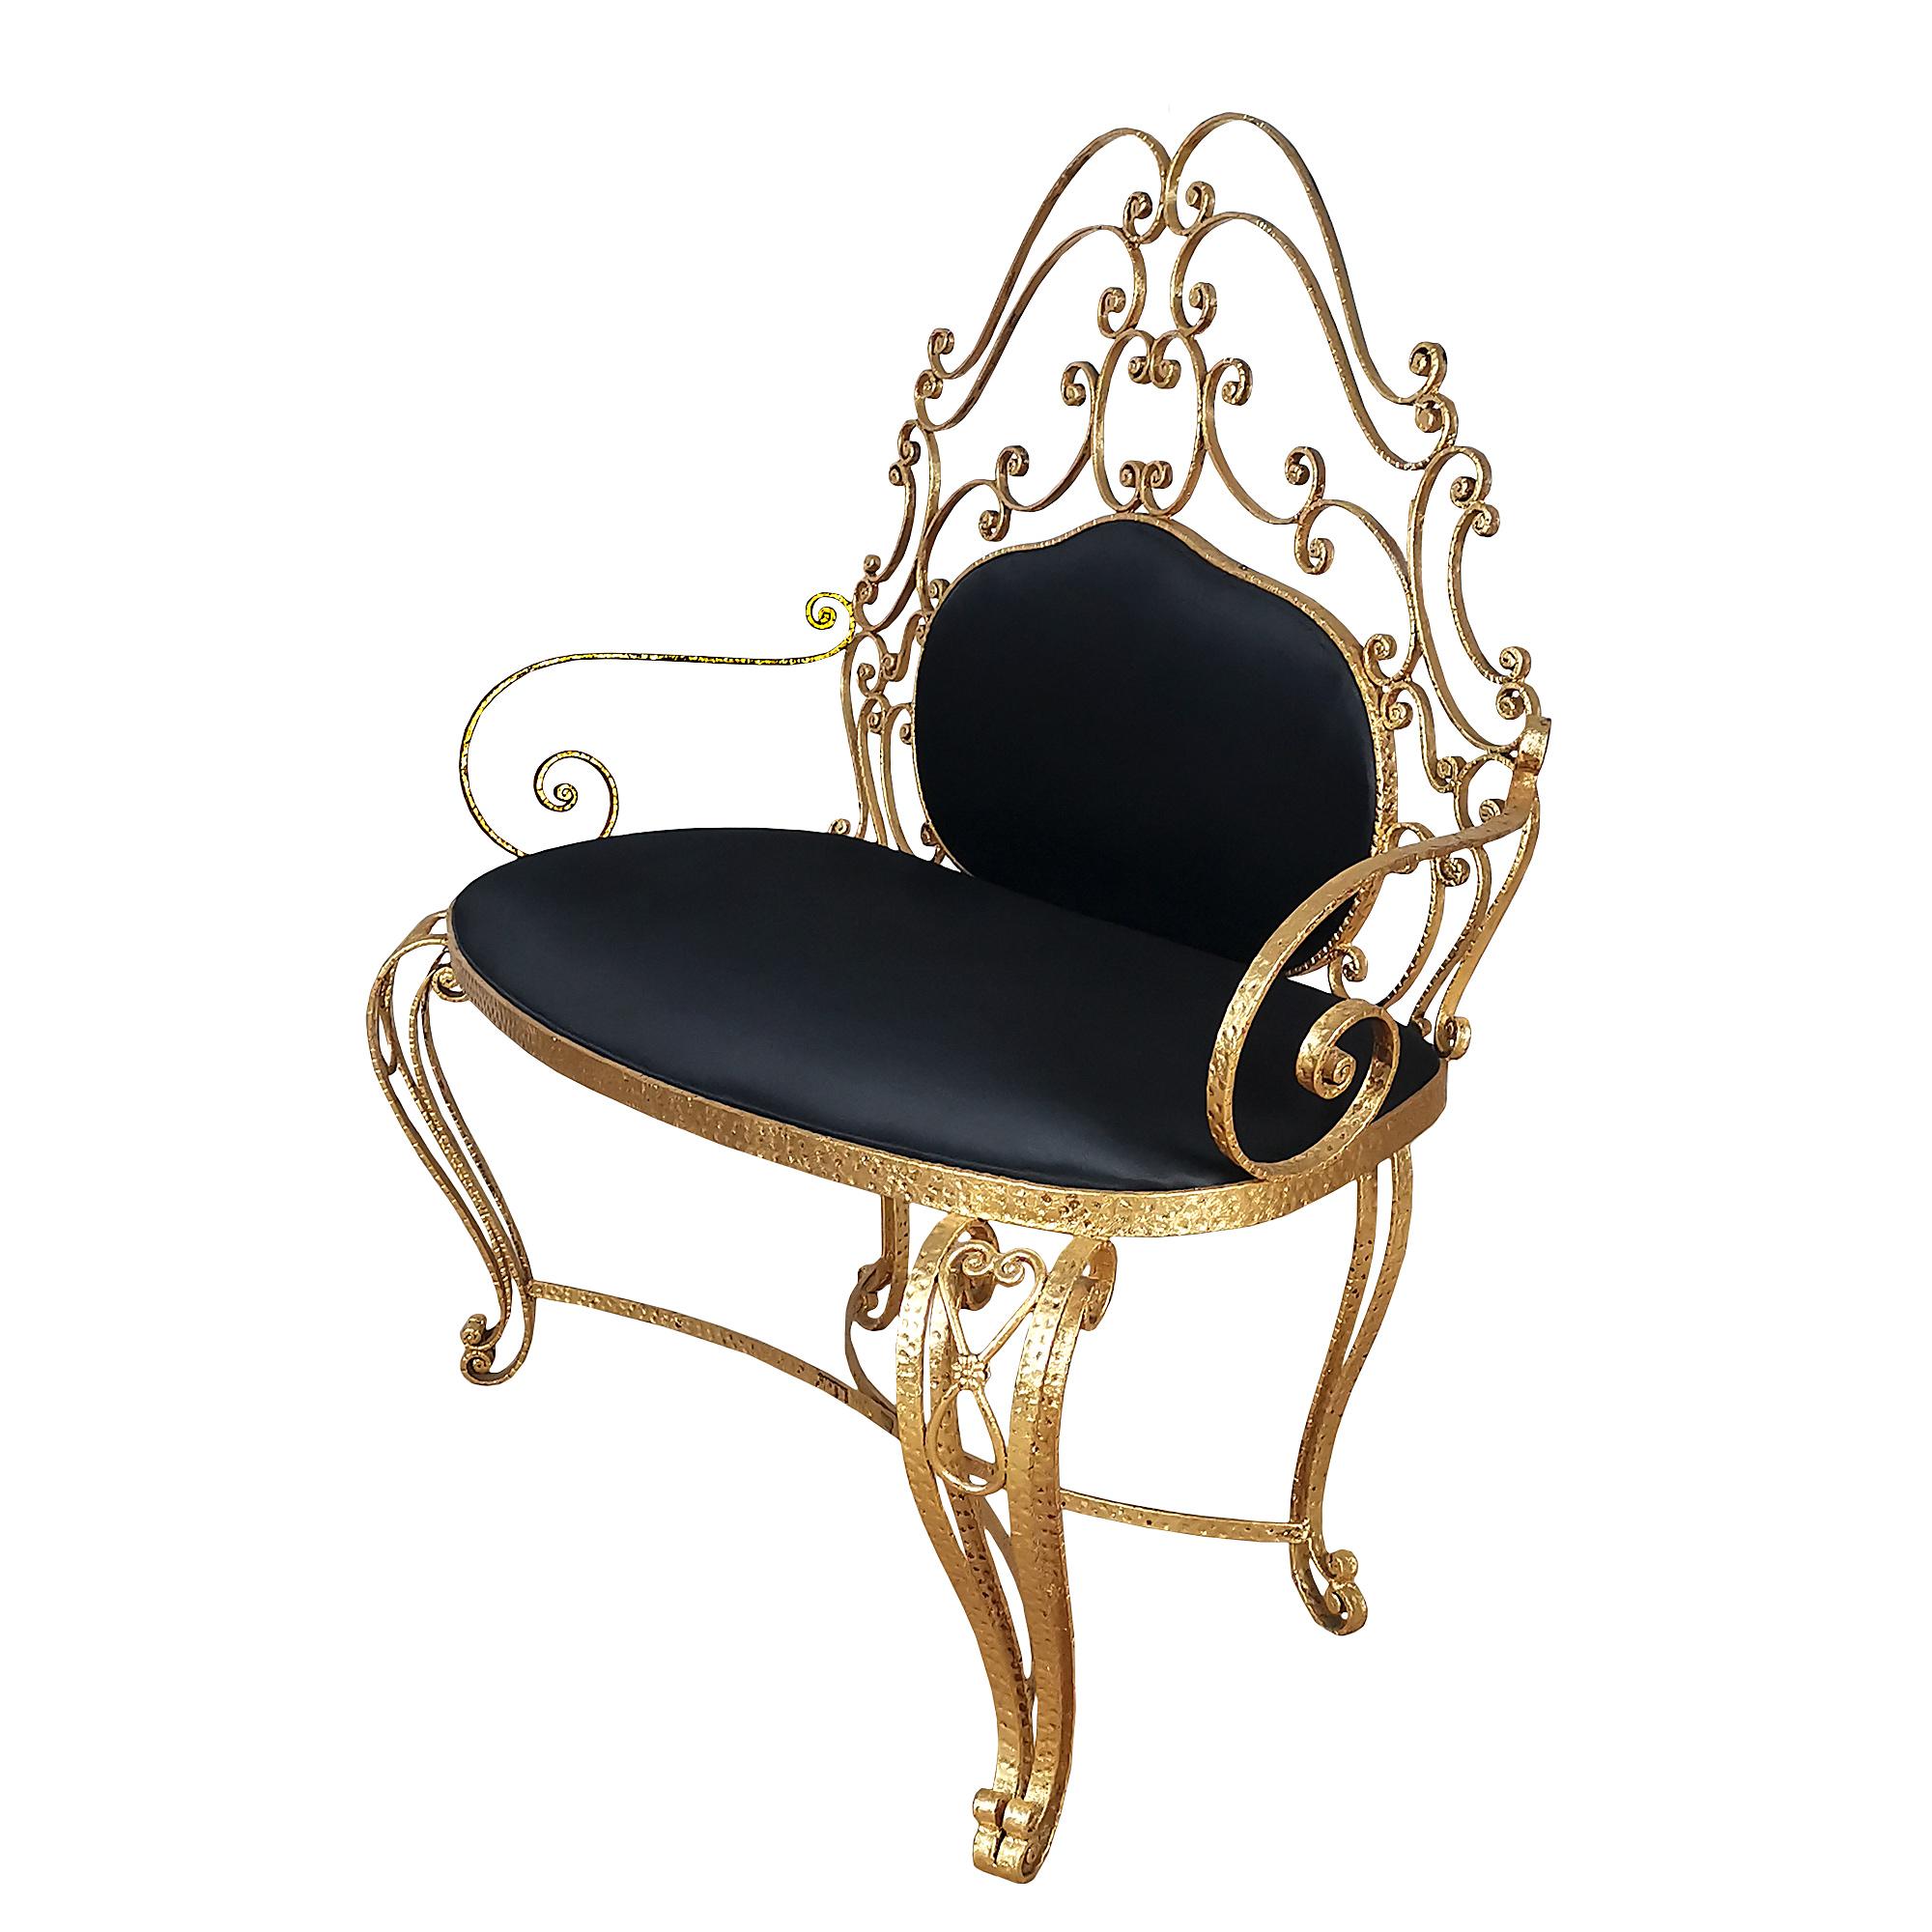 Small 3-piece lounge in wrought iron gilded with gold leaf, upholstery redone in black satin.
Design: Pier Luigi Colli.

Italy circa 1950.


Dimensions:
cm armchair 107 x 45 x 100 seat 45 Chair 47 x 44 x 100 seat 45
inches armchair 42.12x